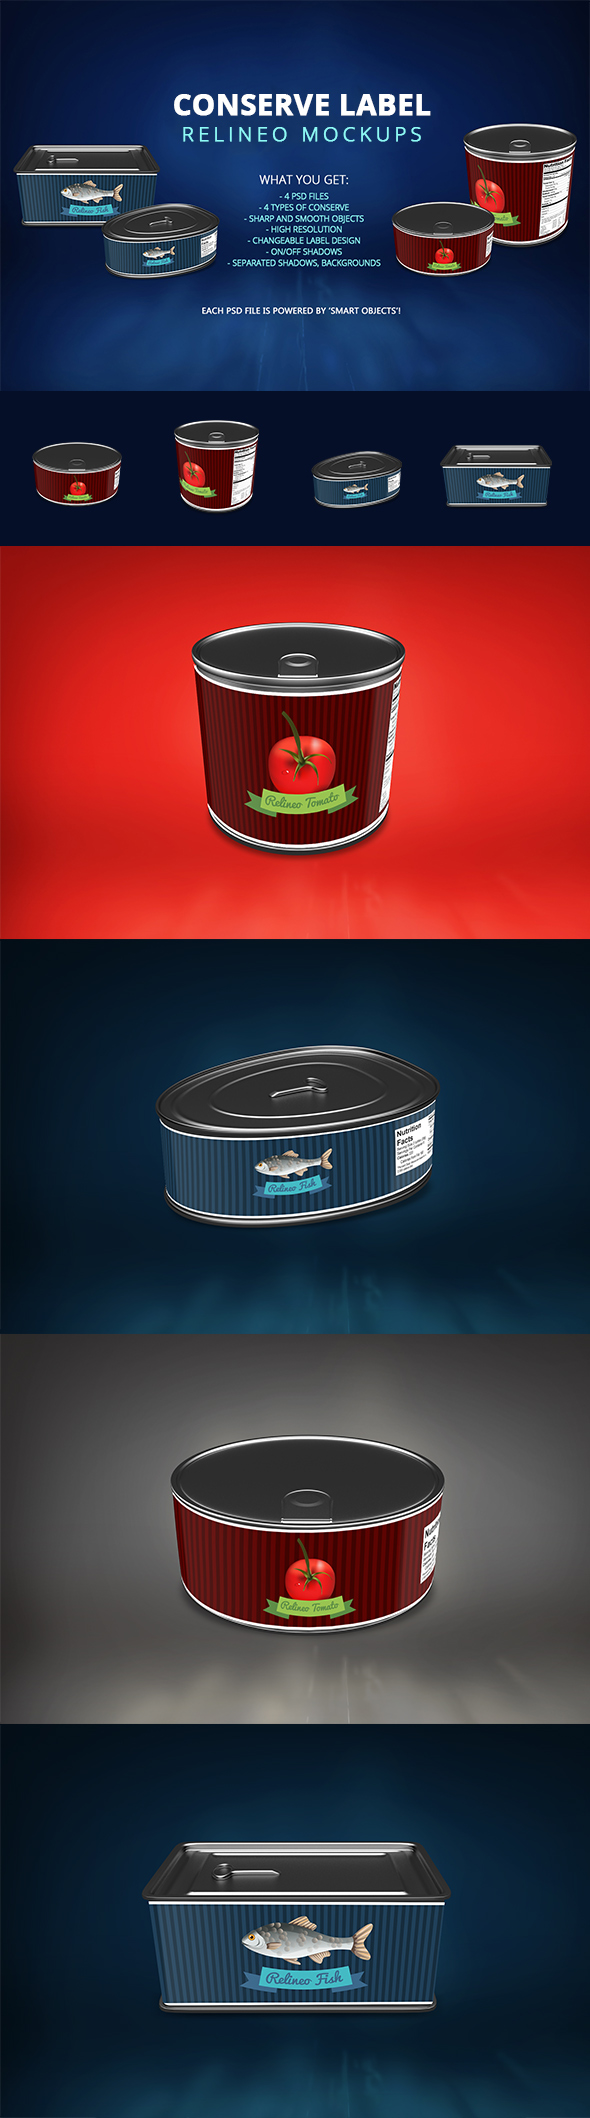 Aluminum box can canned Conserve container fish Food  Label merchandise metal mock-up Mockup object package presentations